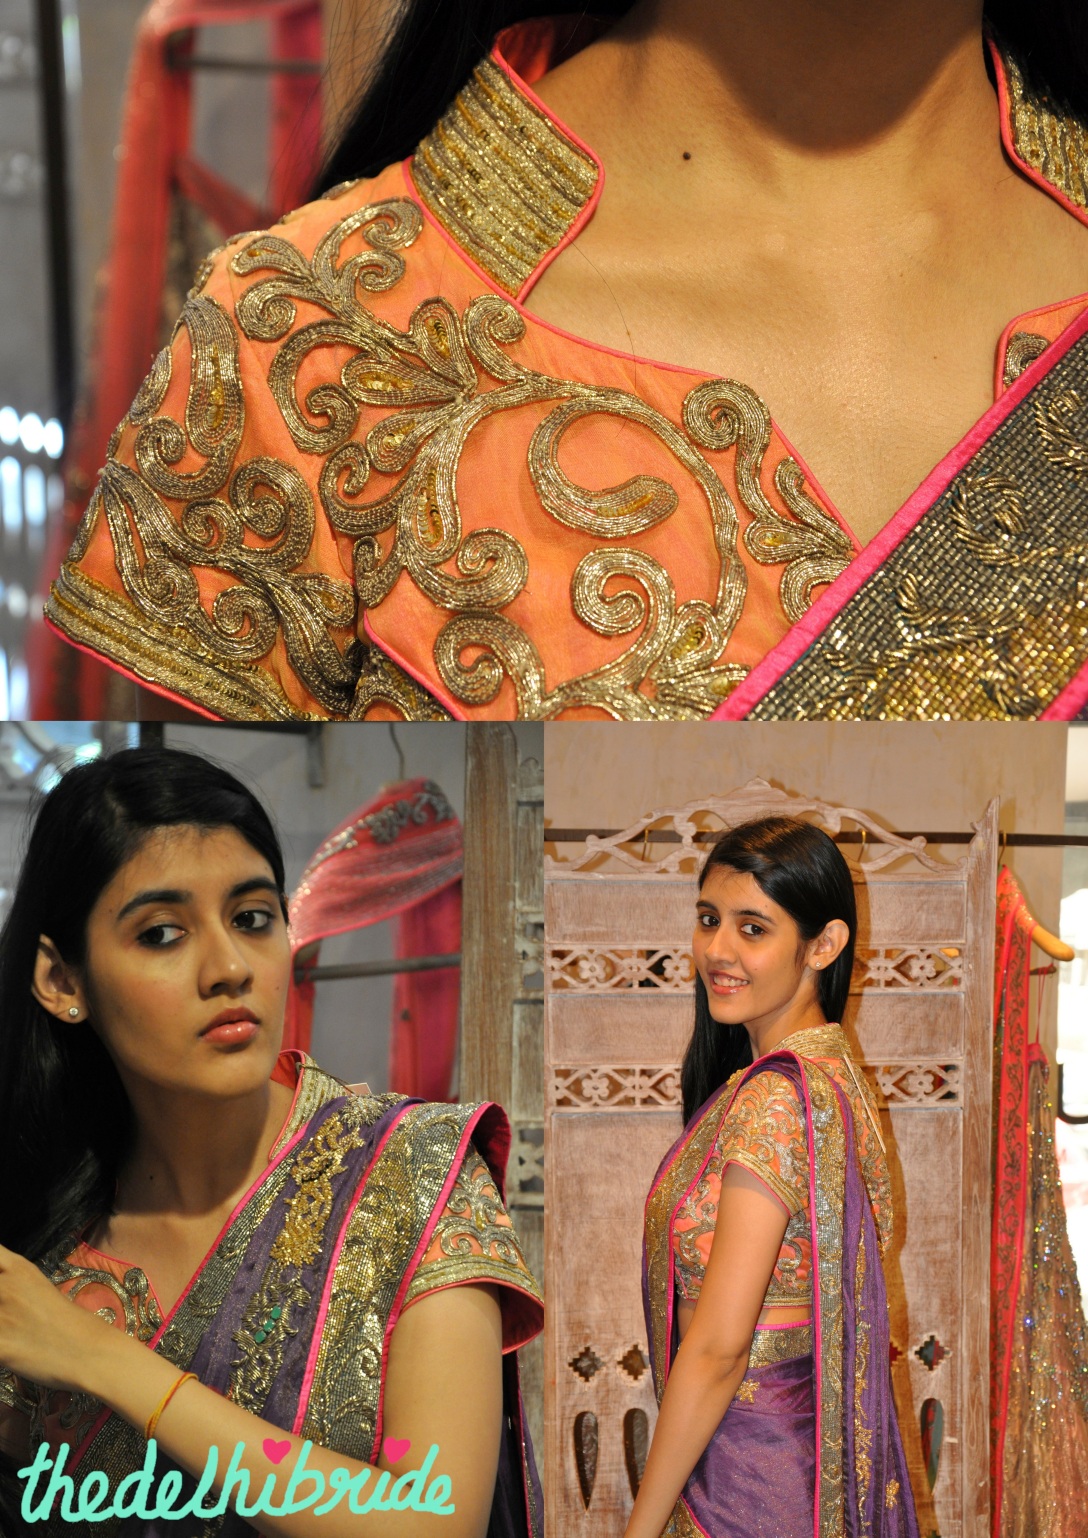 Details of the lehenga. Absolutely love the blouse.